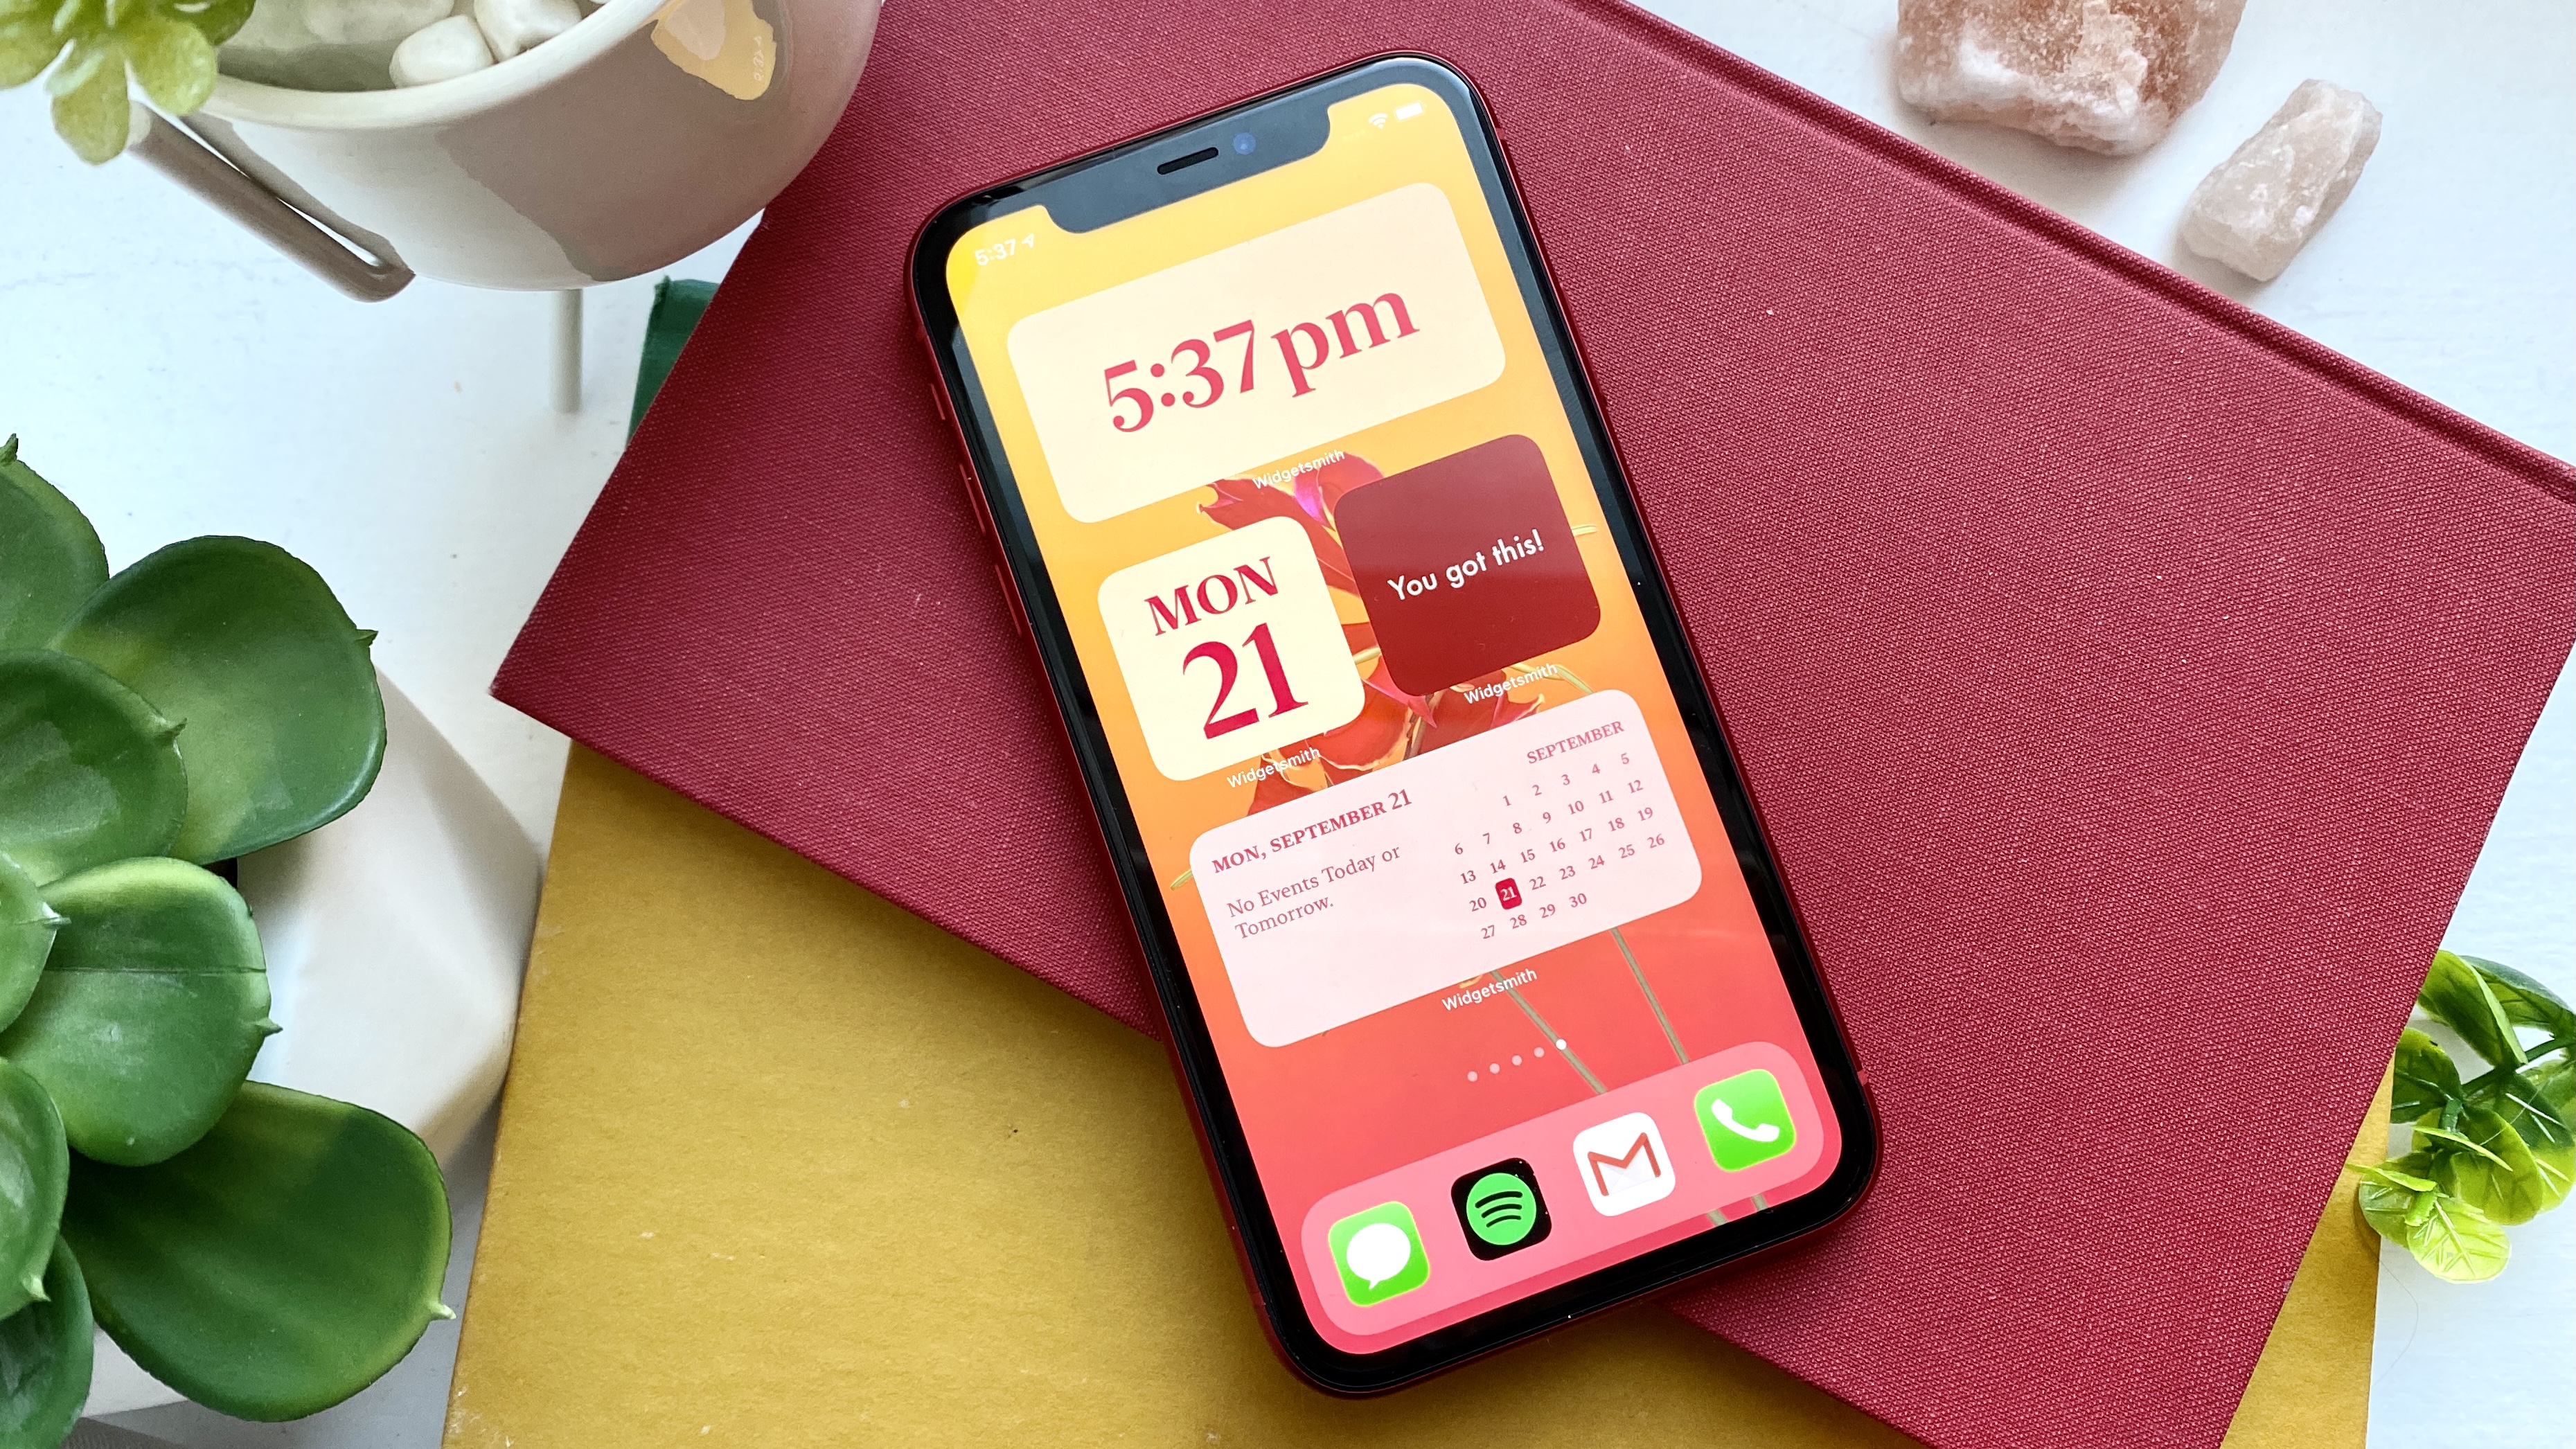 How To Make Custom Iphone Widgets And App Icons With Ios 14 Tom S Guide